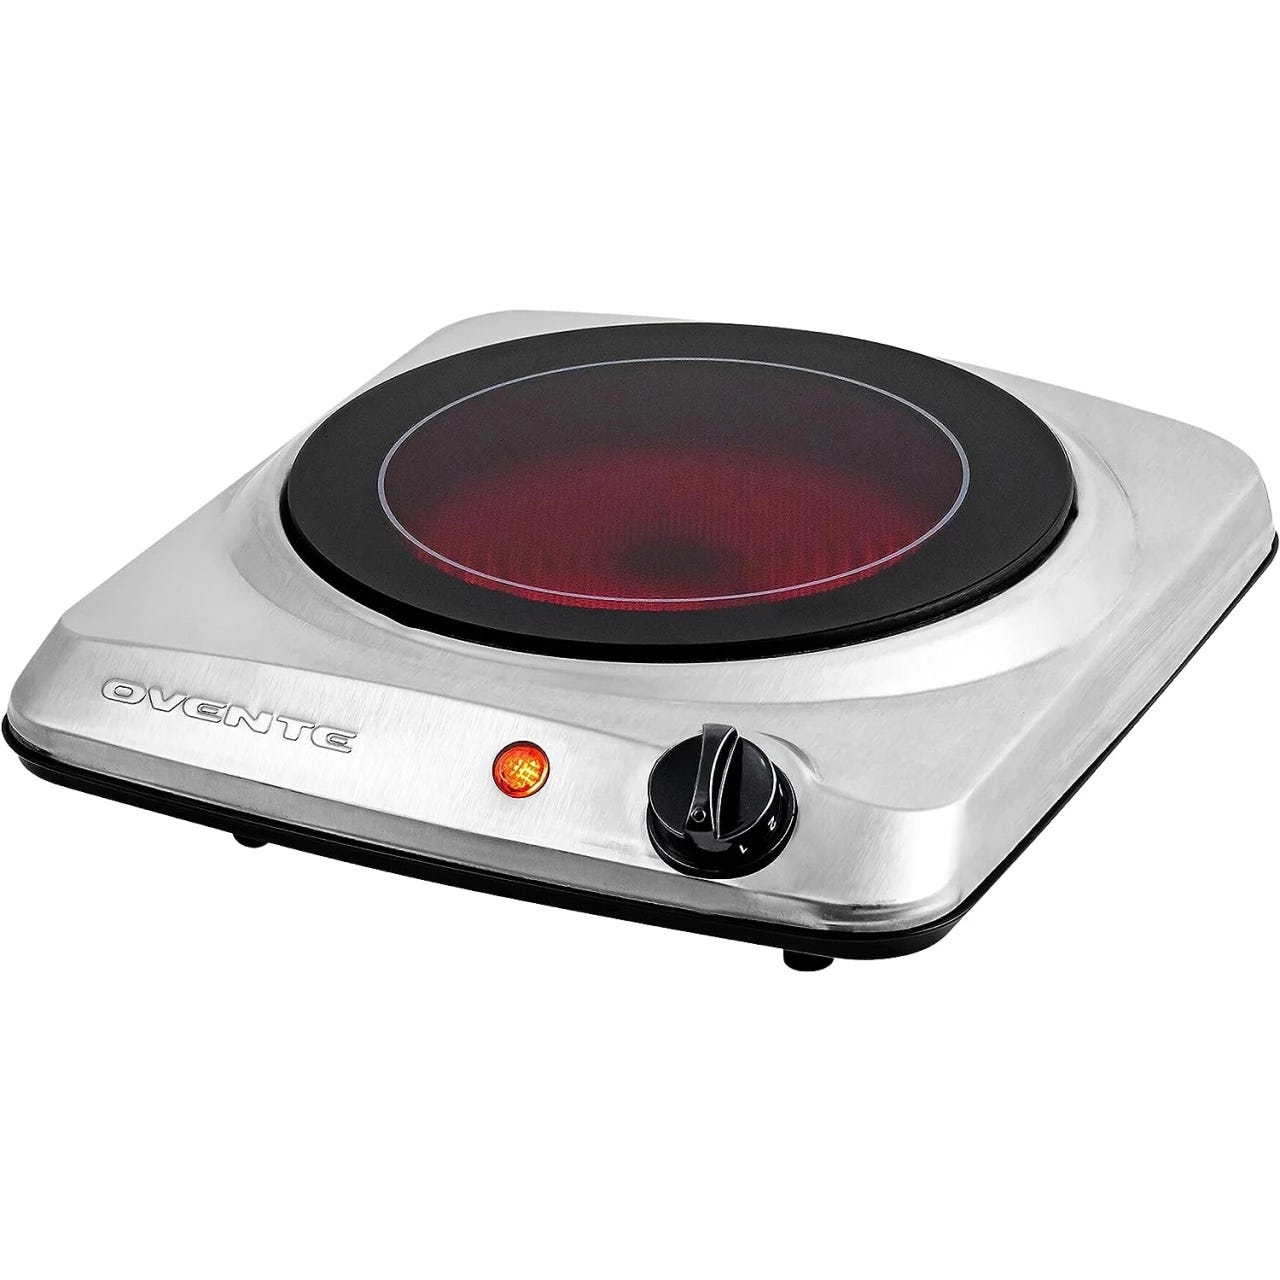 Proctor Silex Electric Single Burner Cooktop, Compact and Portable, Adjustable Temperature Hot Plate, 1200 Watts, 34106, White & Stainless